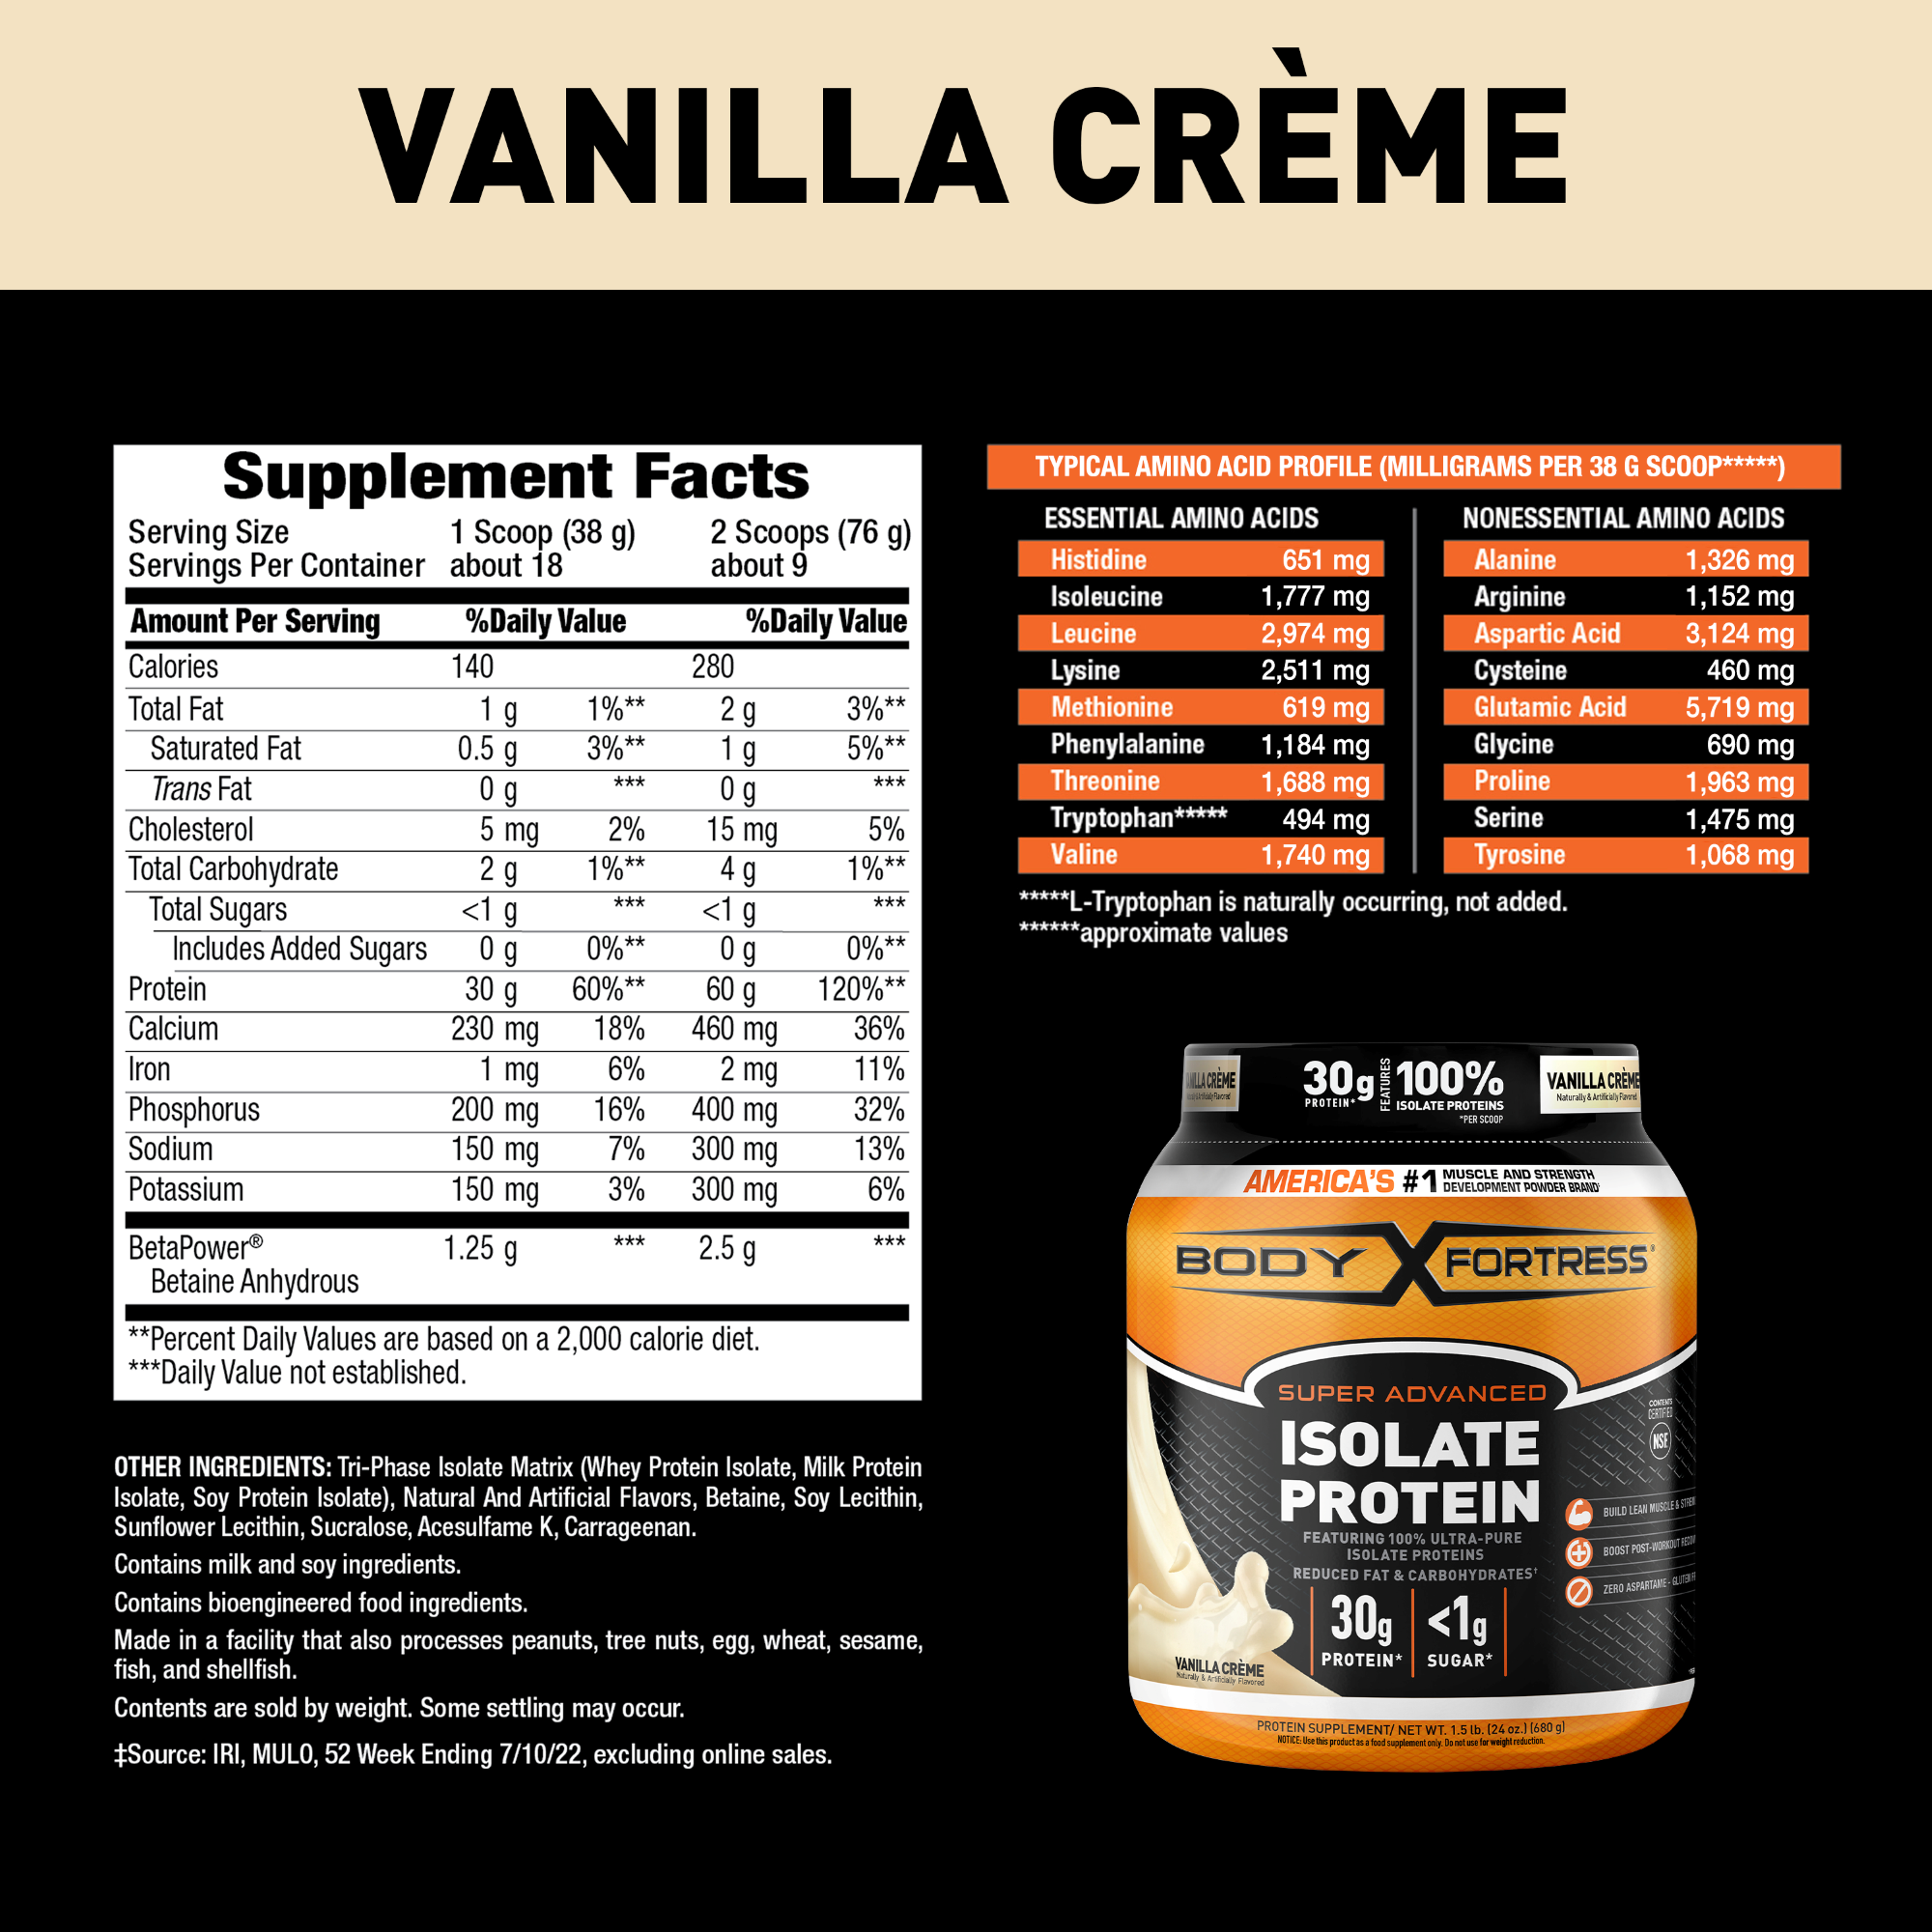 Body Fortress Isolate Powder, 30g Protein per scoop, Vanilla, 1.5 lbs (Packaging May Vary) - image 2 of 6